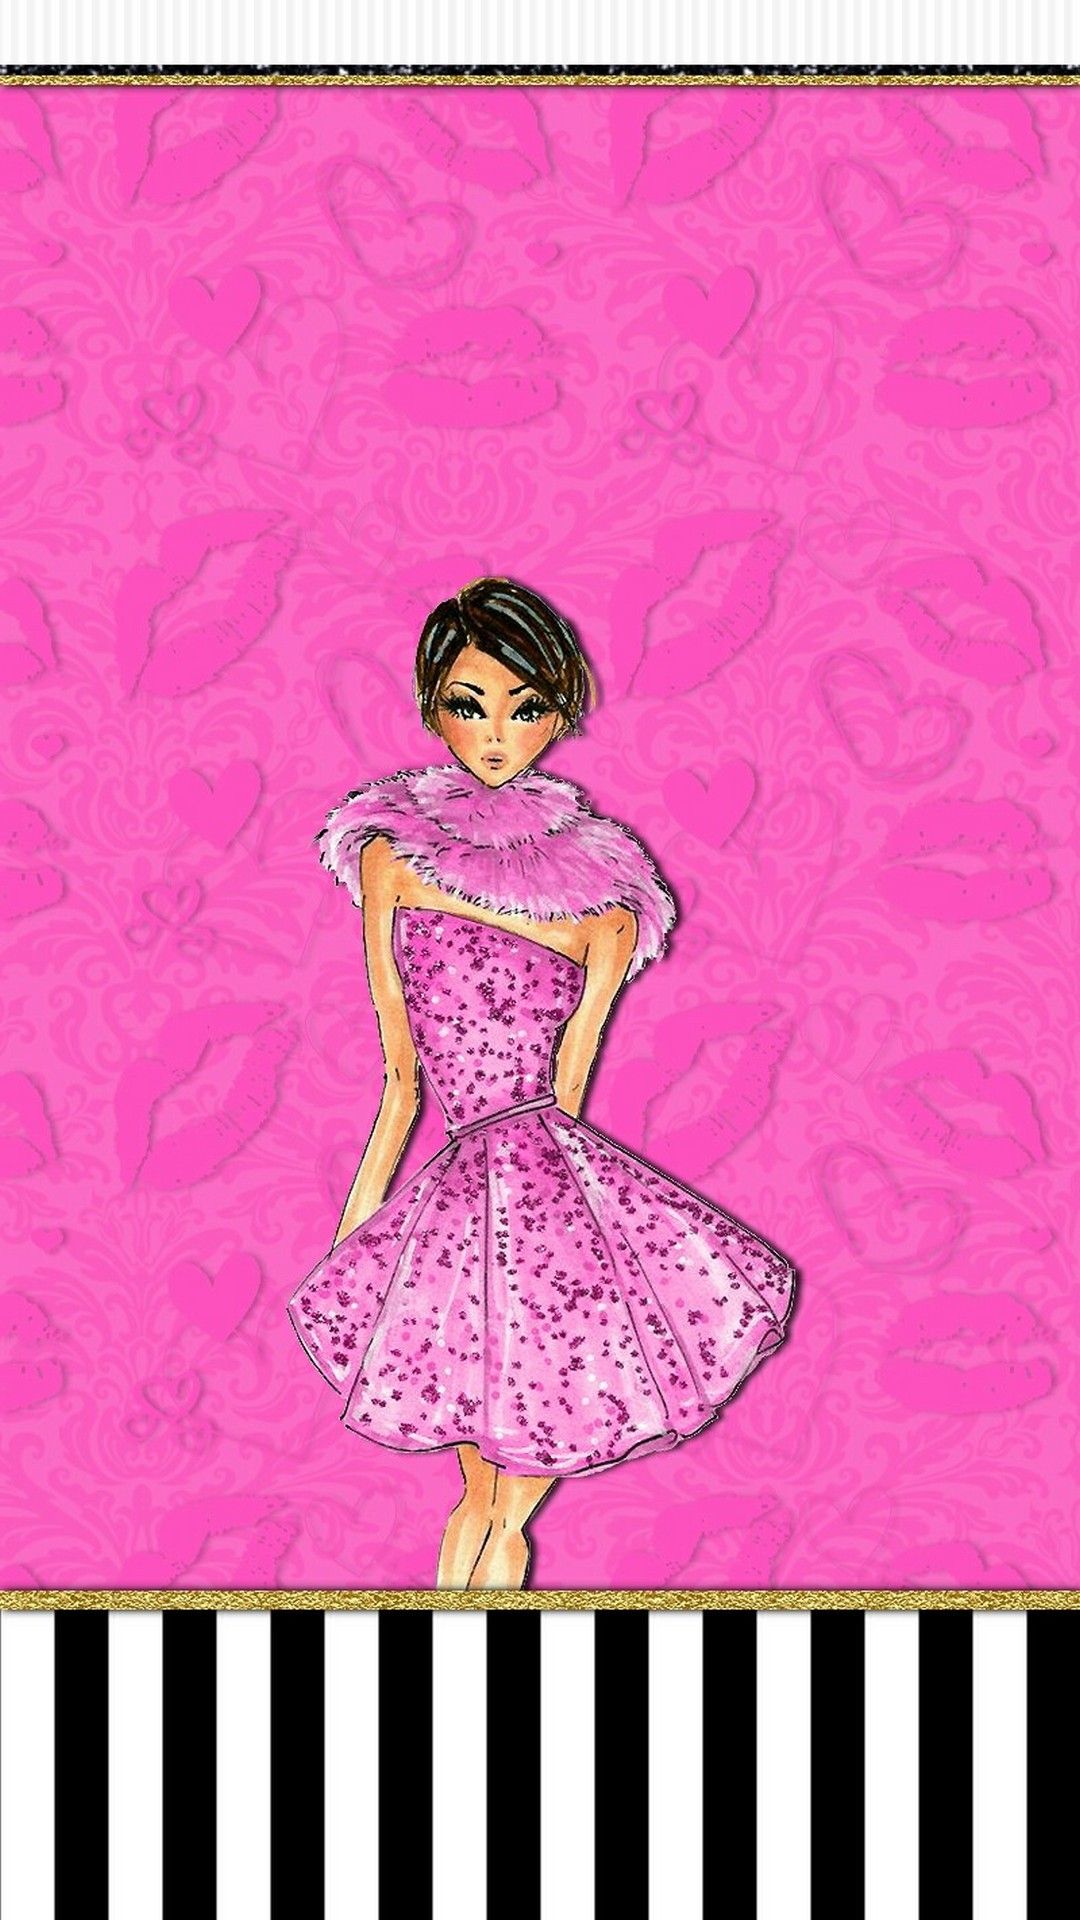 Pink Girly Wallpaper Android Android Wallpaper